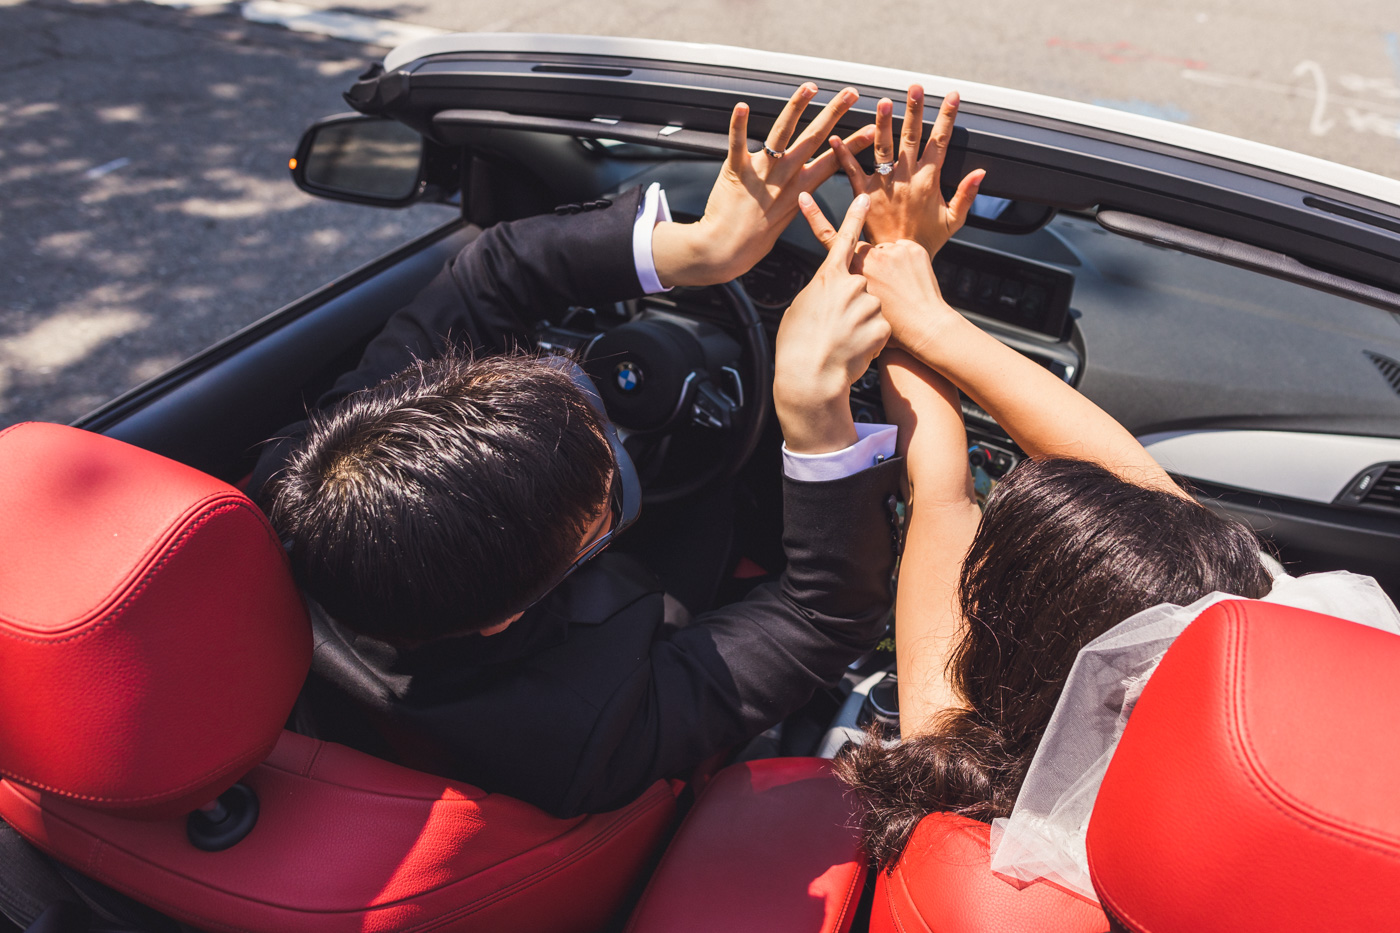 bride-and-groom-showing-off-rings-in-convertible